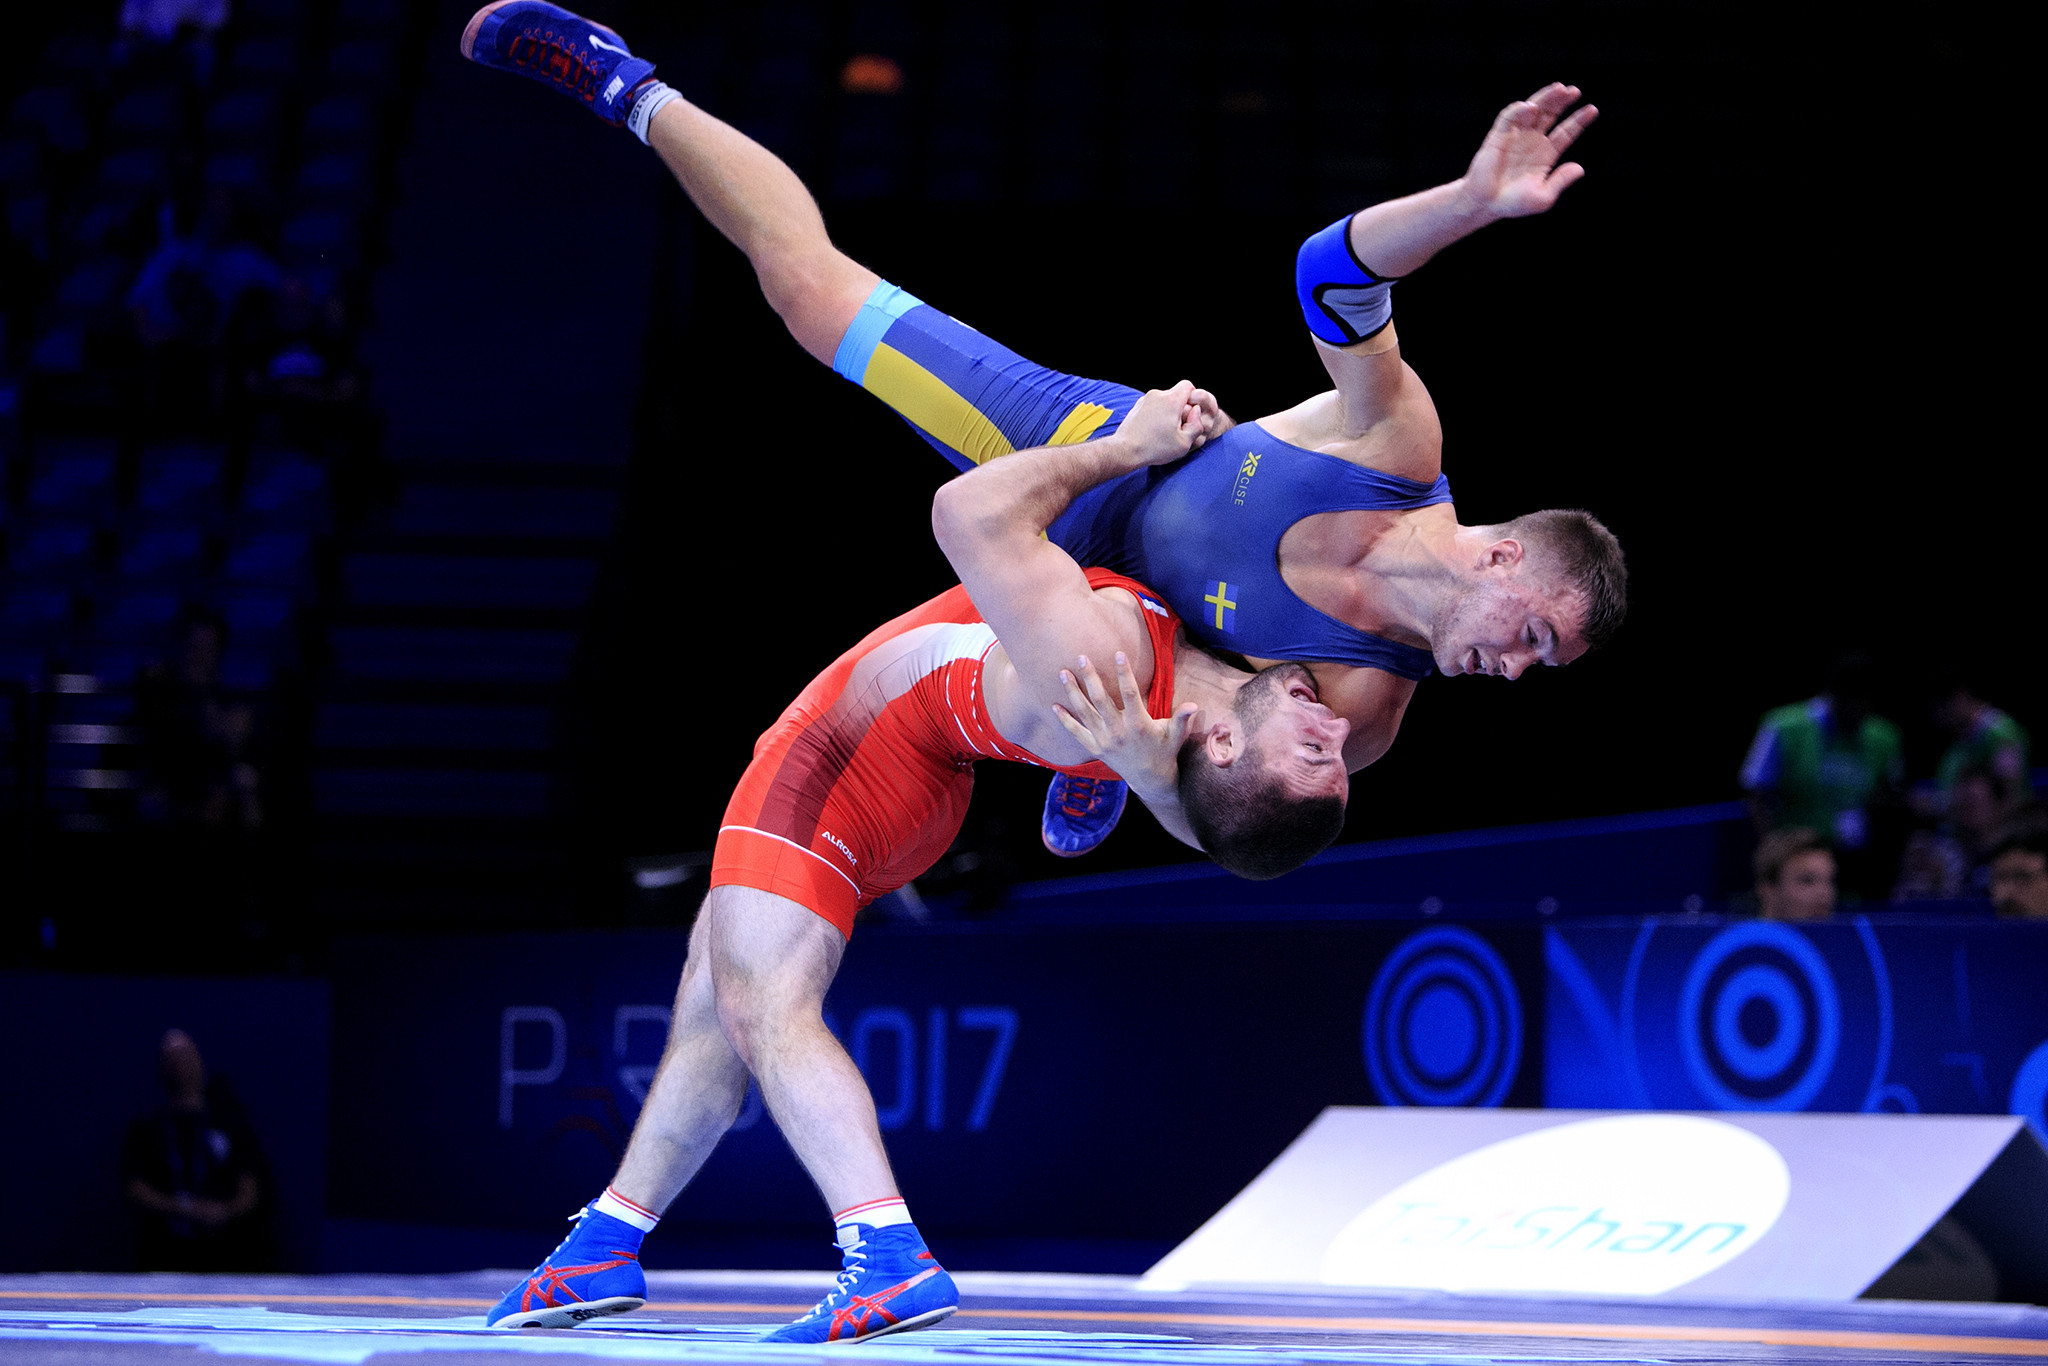 Eurosport have agreed a deal to broadcast coverage of wrestling's major events in the build-up to Tokyo 2020 ©UWW